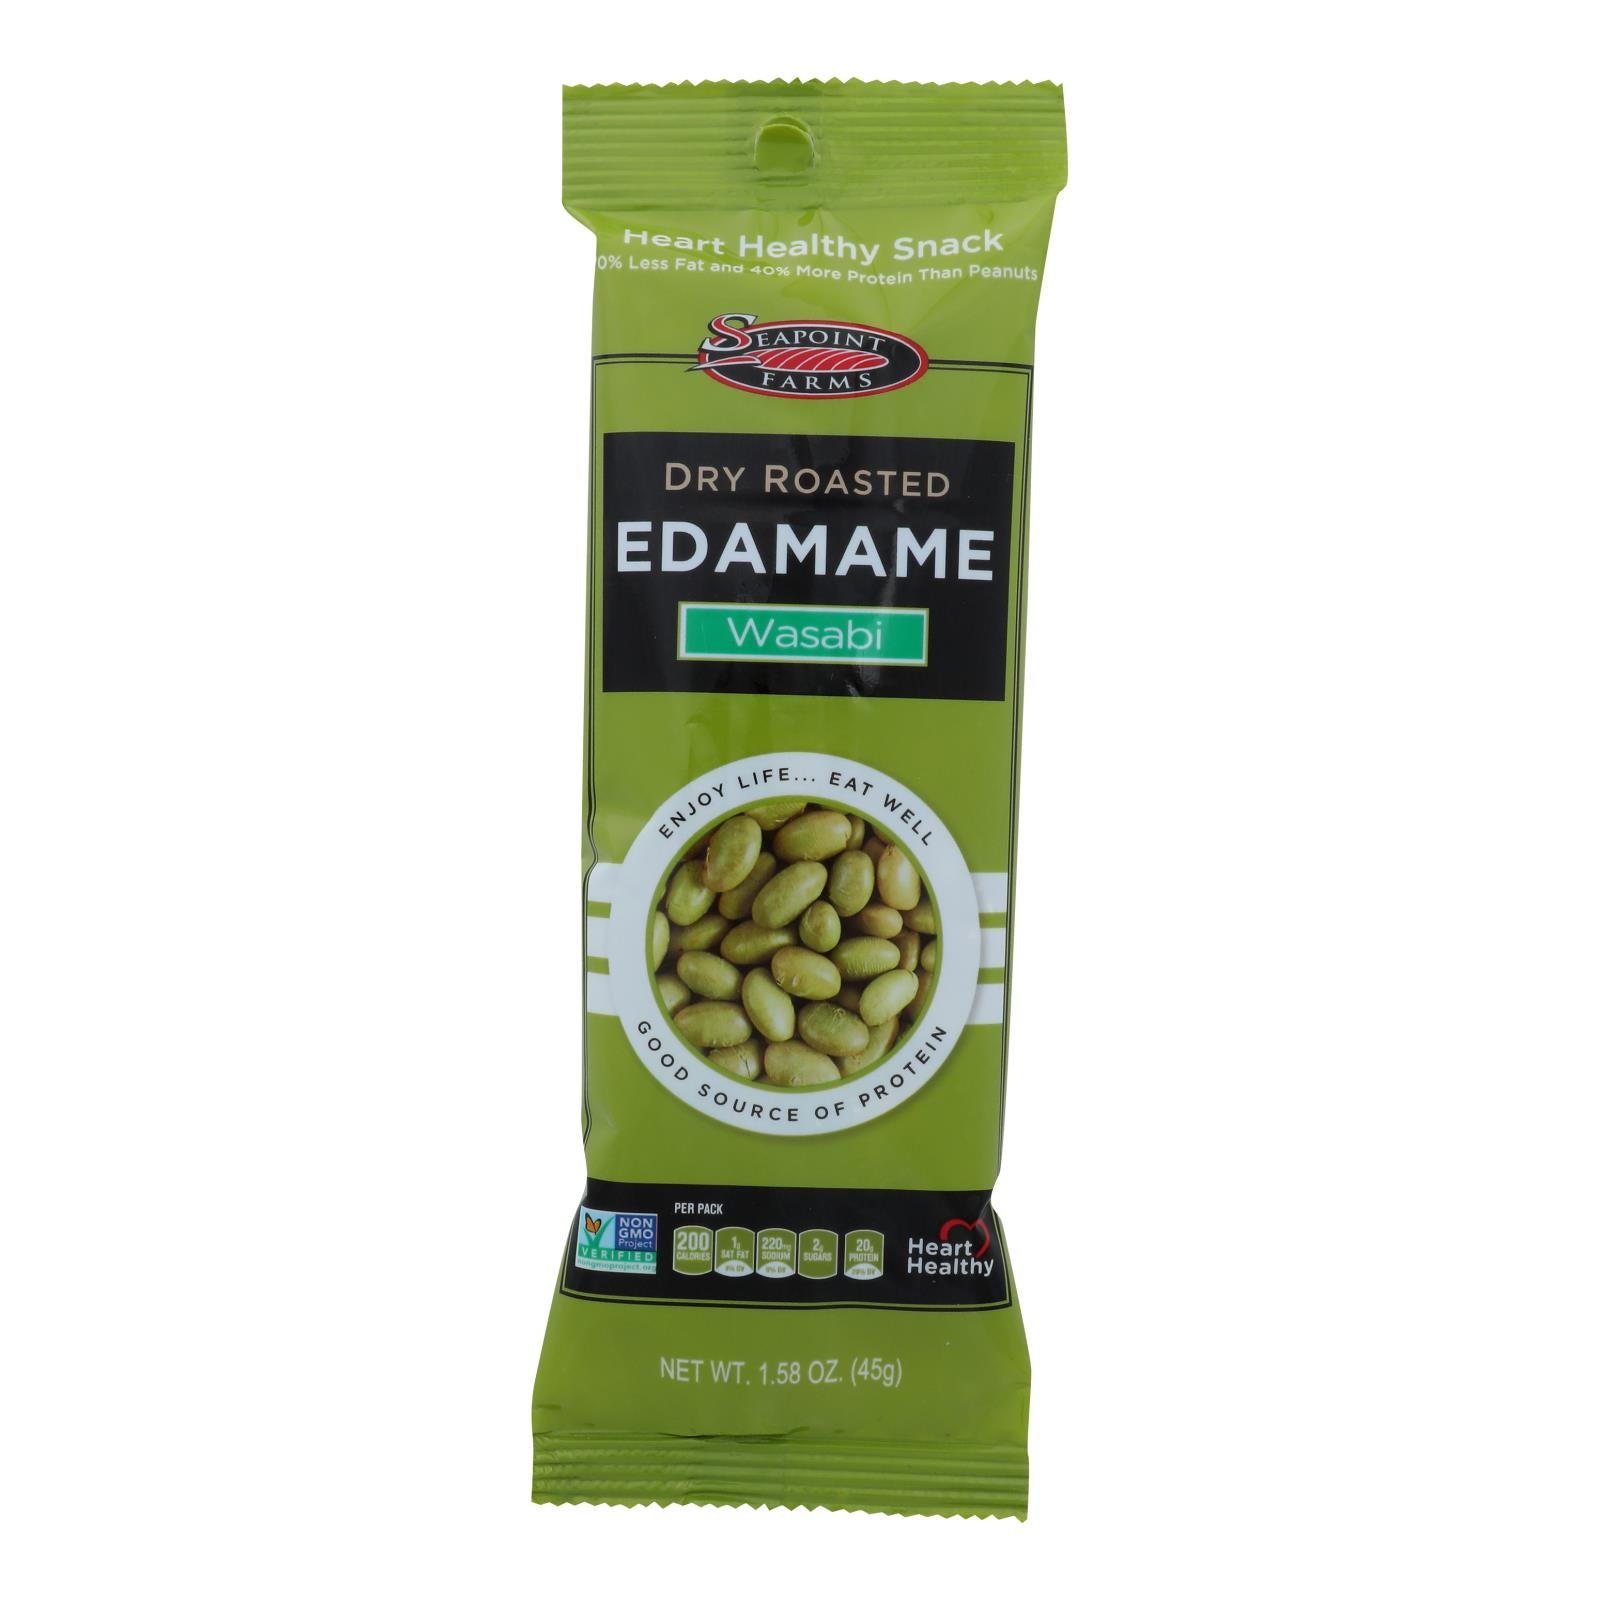 Seapoint Farms Edamame - Dry Roasted - Spicy Wasabi - 1.58 oz - Case of 12